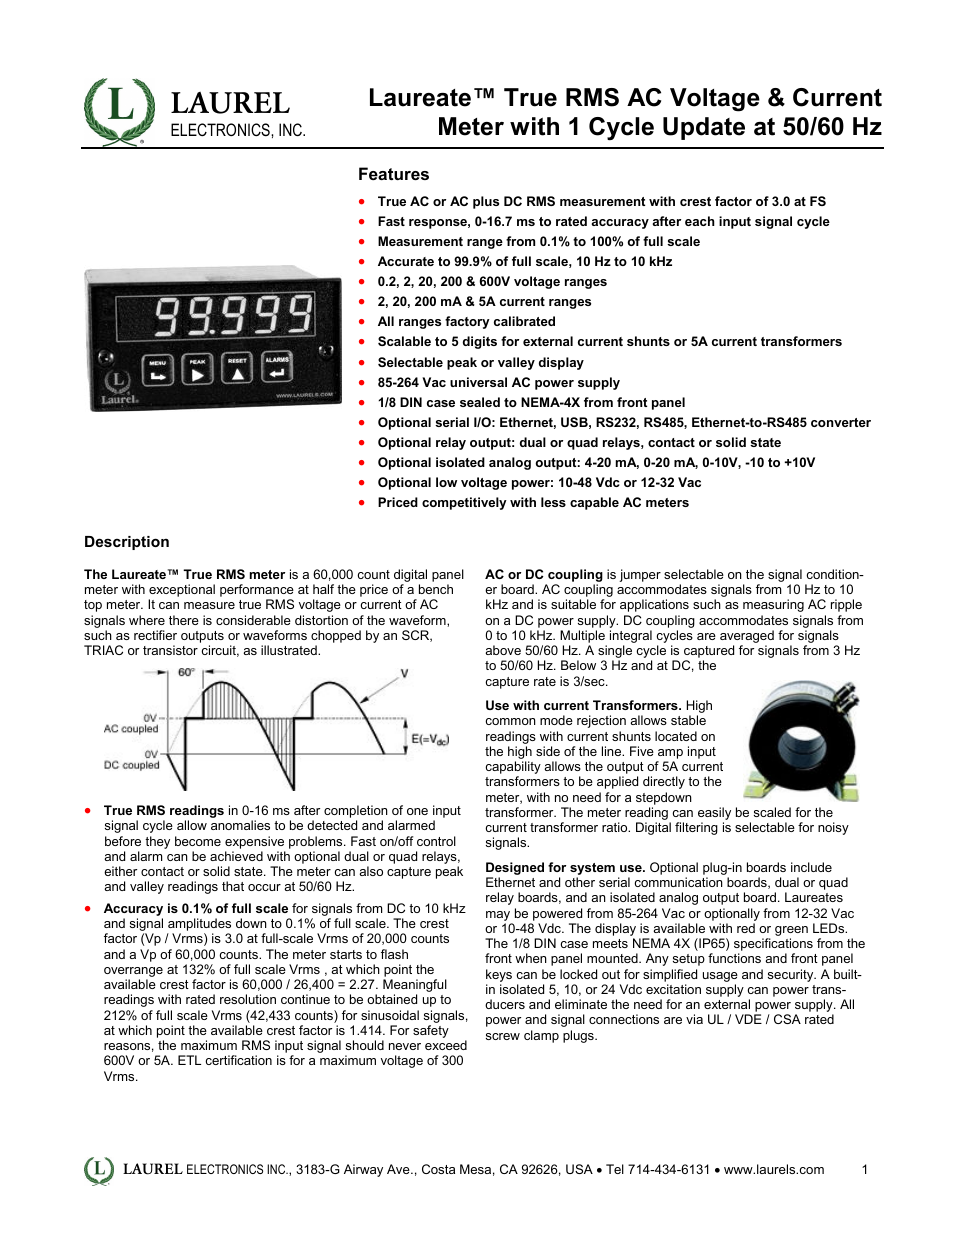 Laureate True RMS AC Voltage & Current Meter with 1 Cycle Update at 50-60 Hz